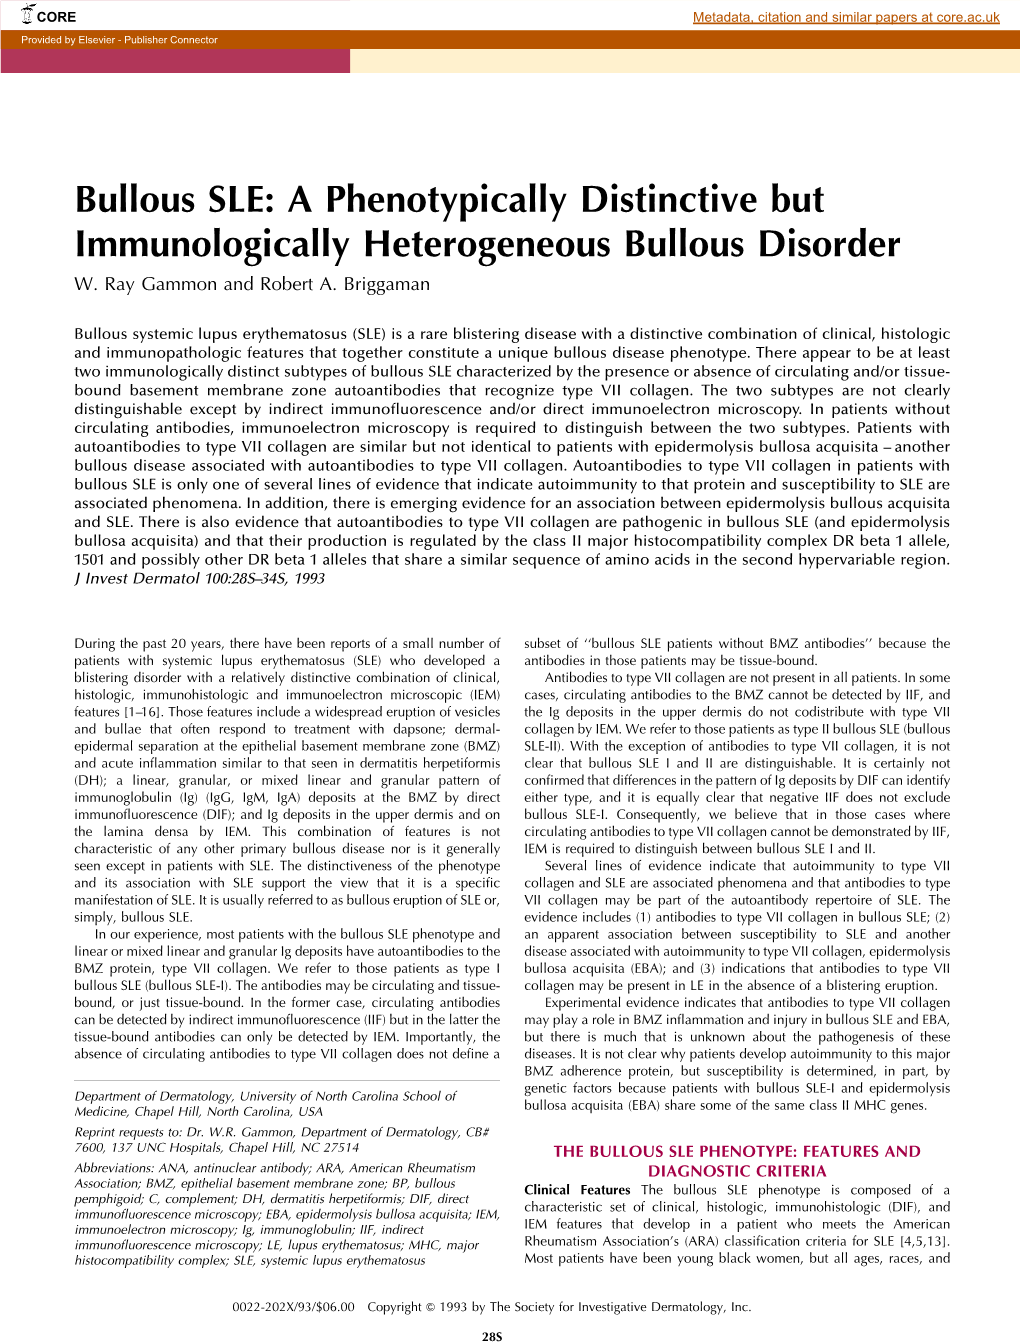 Bullous SLE: a Phenotypically Distinctive but Immunologically Heterogeneous Bullous Disorder W